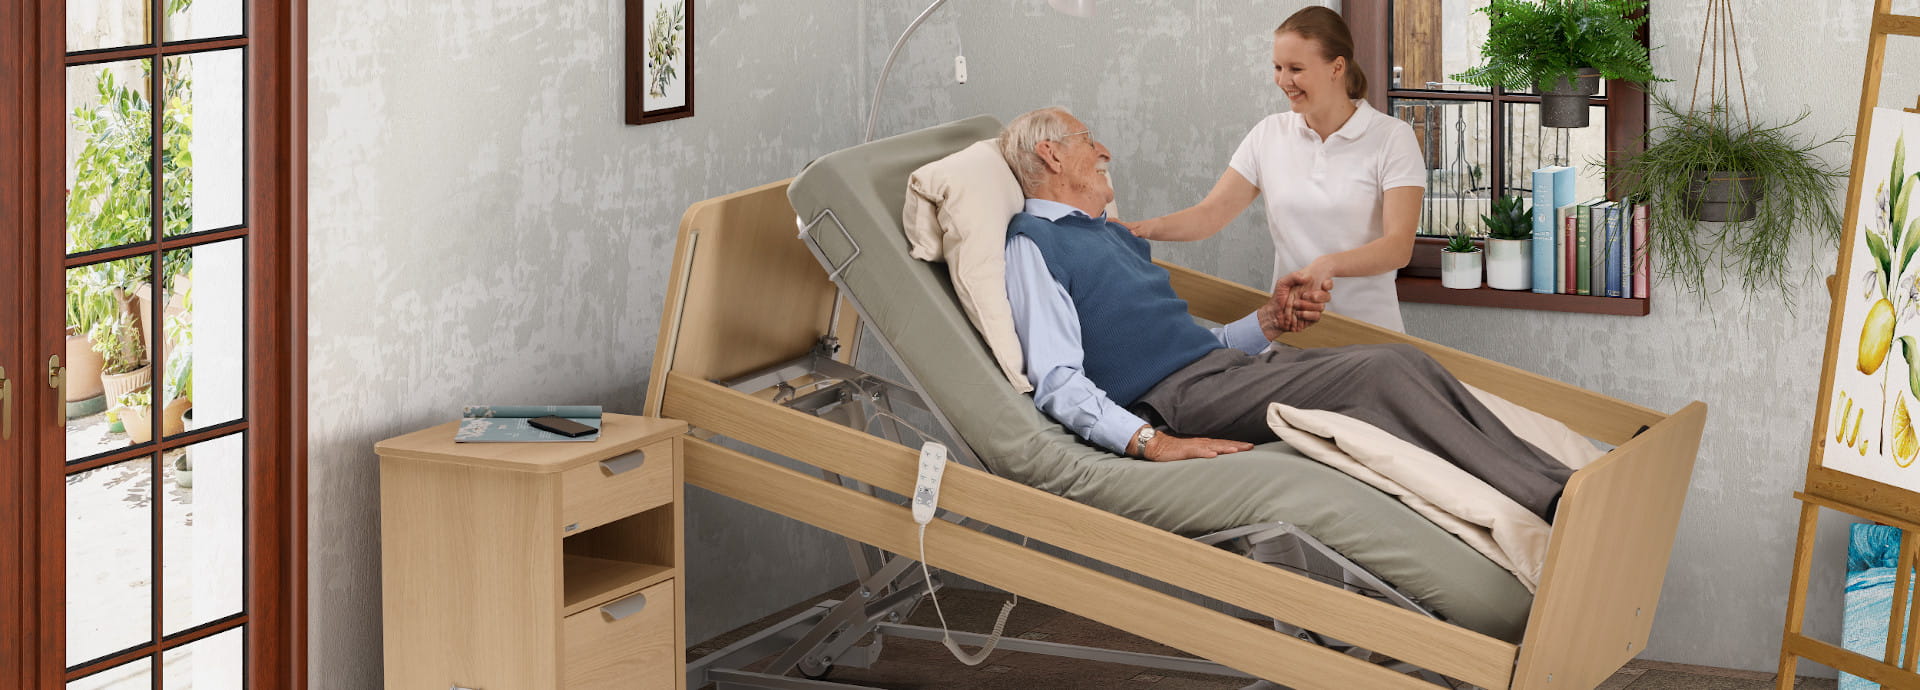 With innovative functions, the movita sc nursing bed enables comfortable care while ensuring the highest level of product safety.  